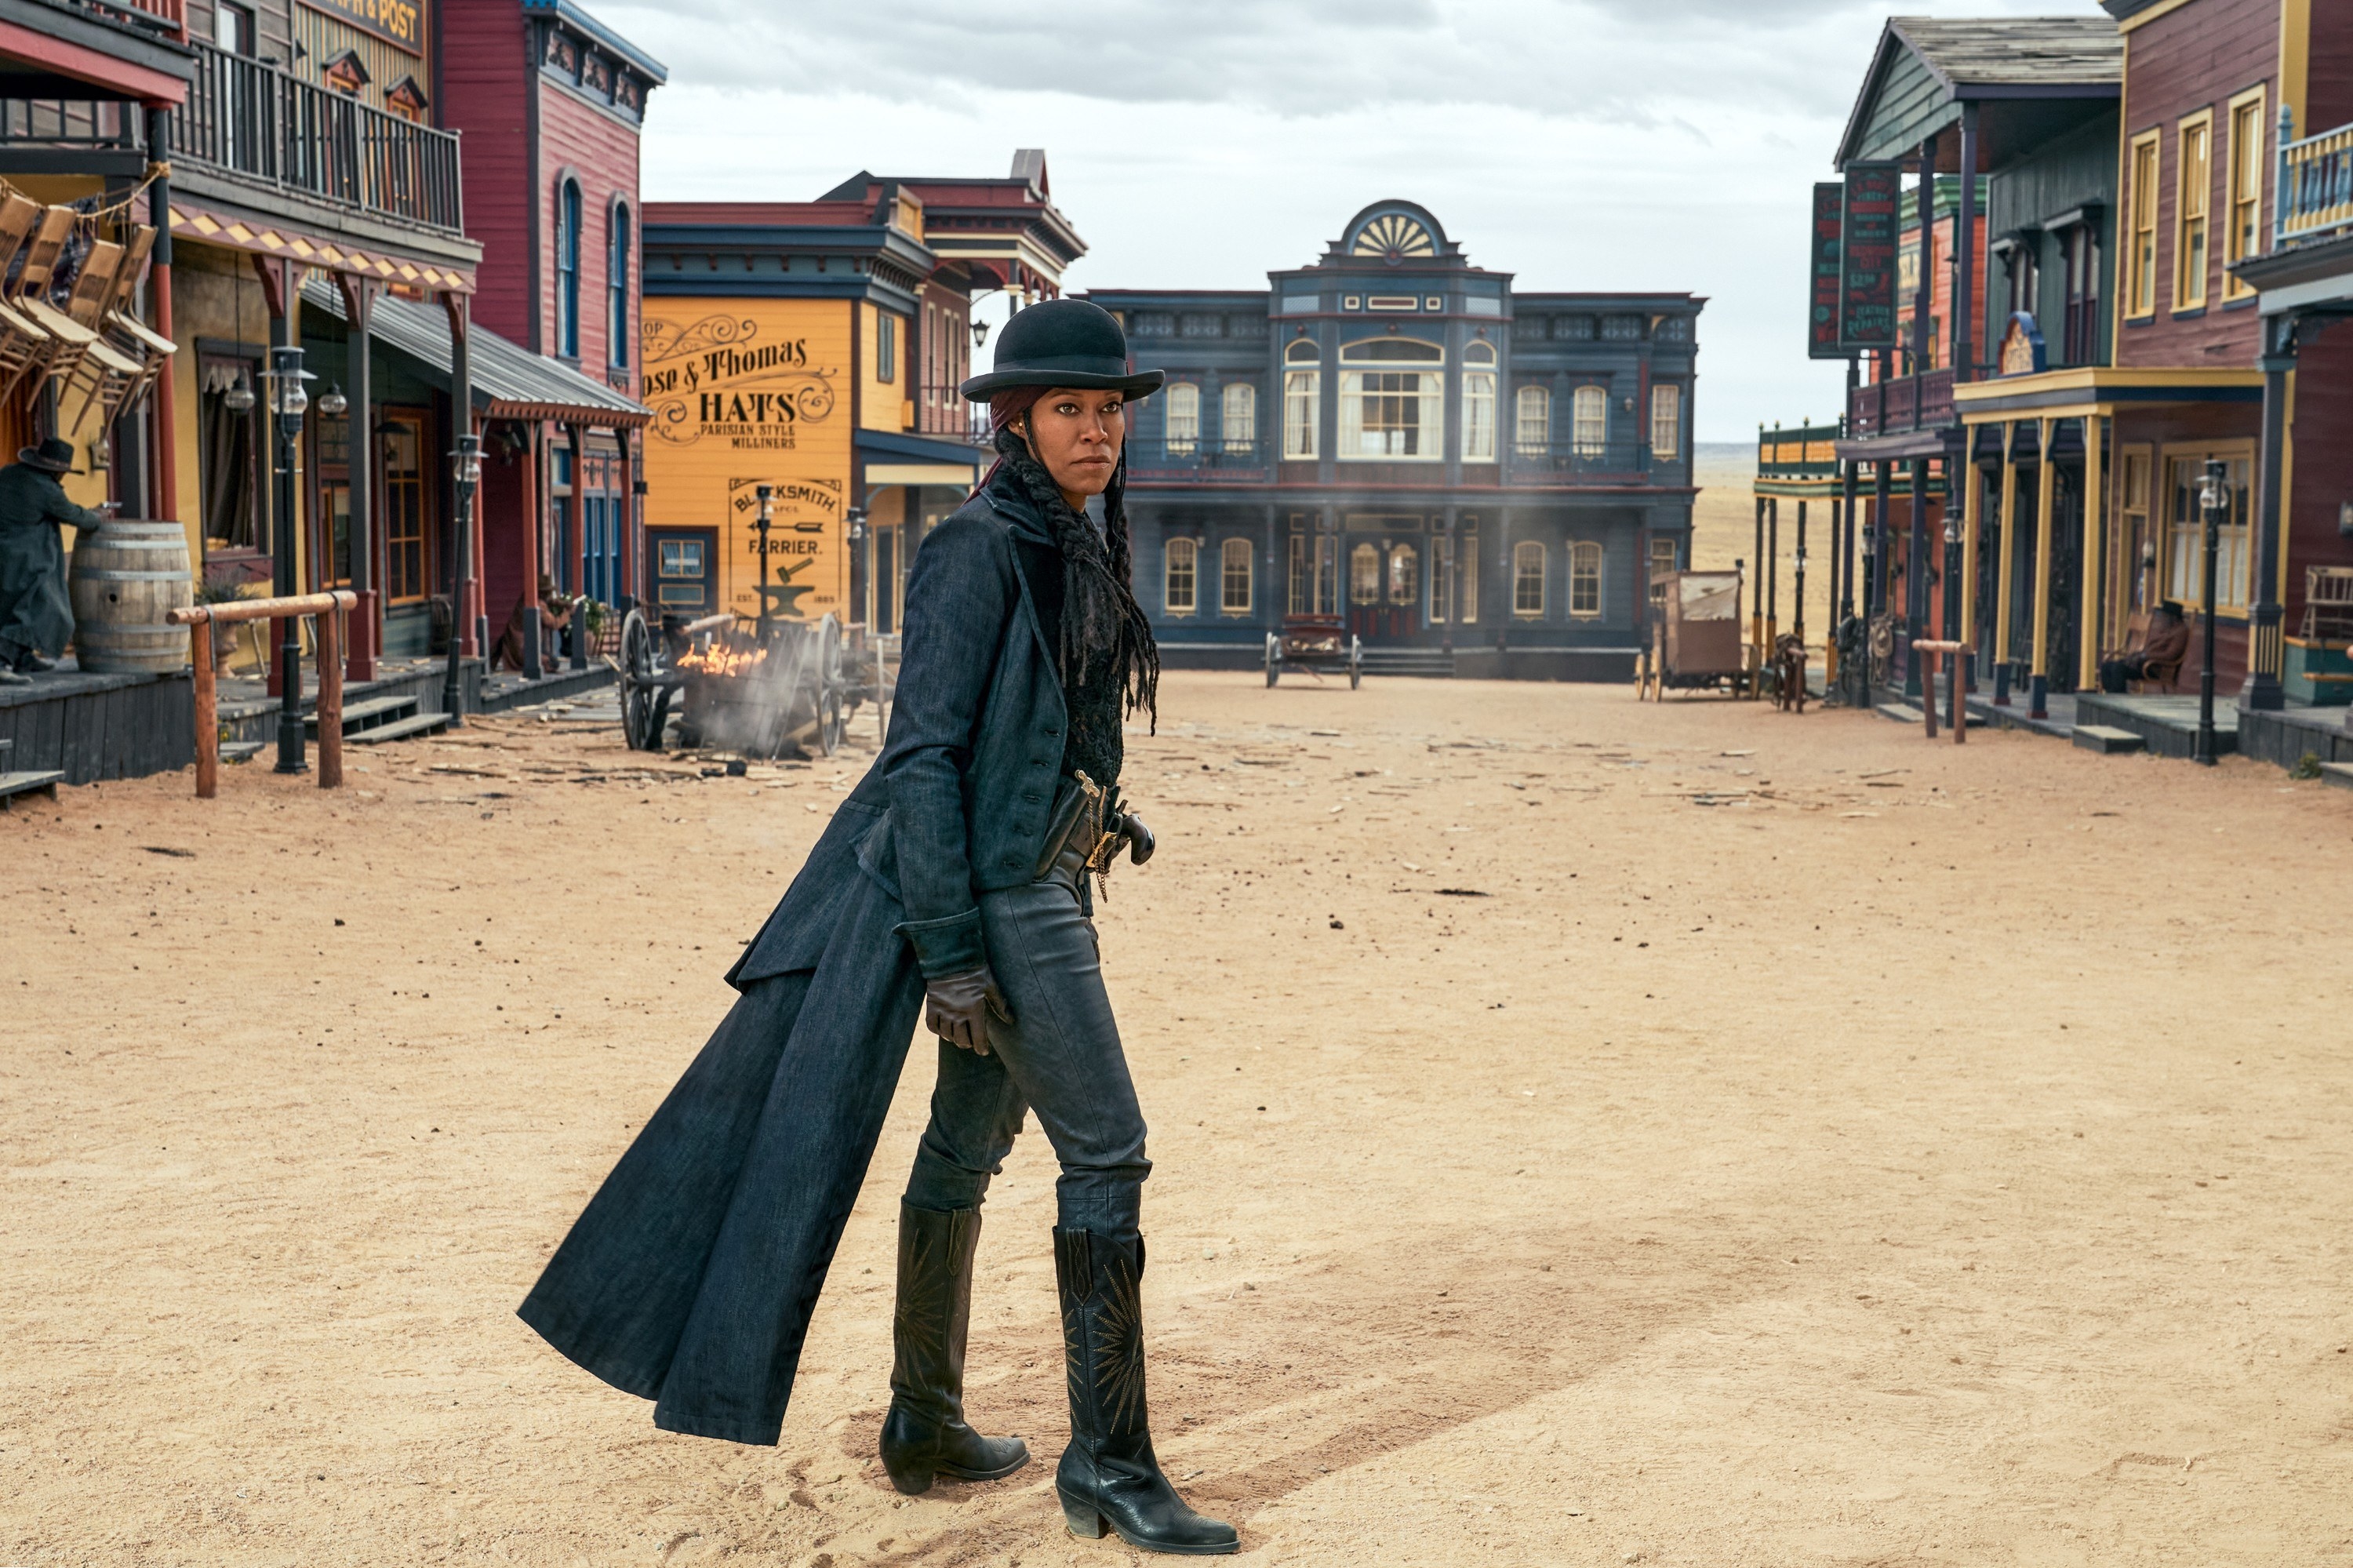 Regina King stands in the dusty main street of a town in the wild west